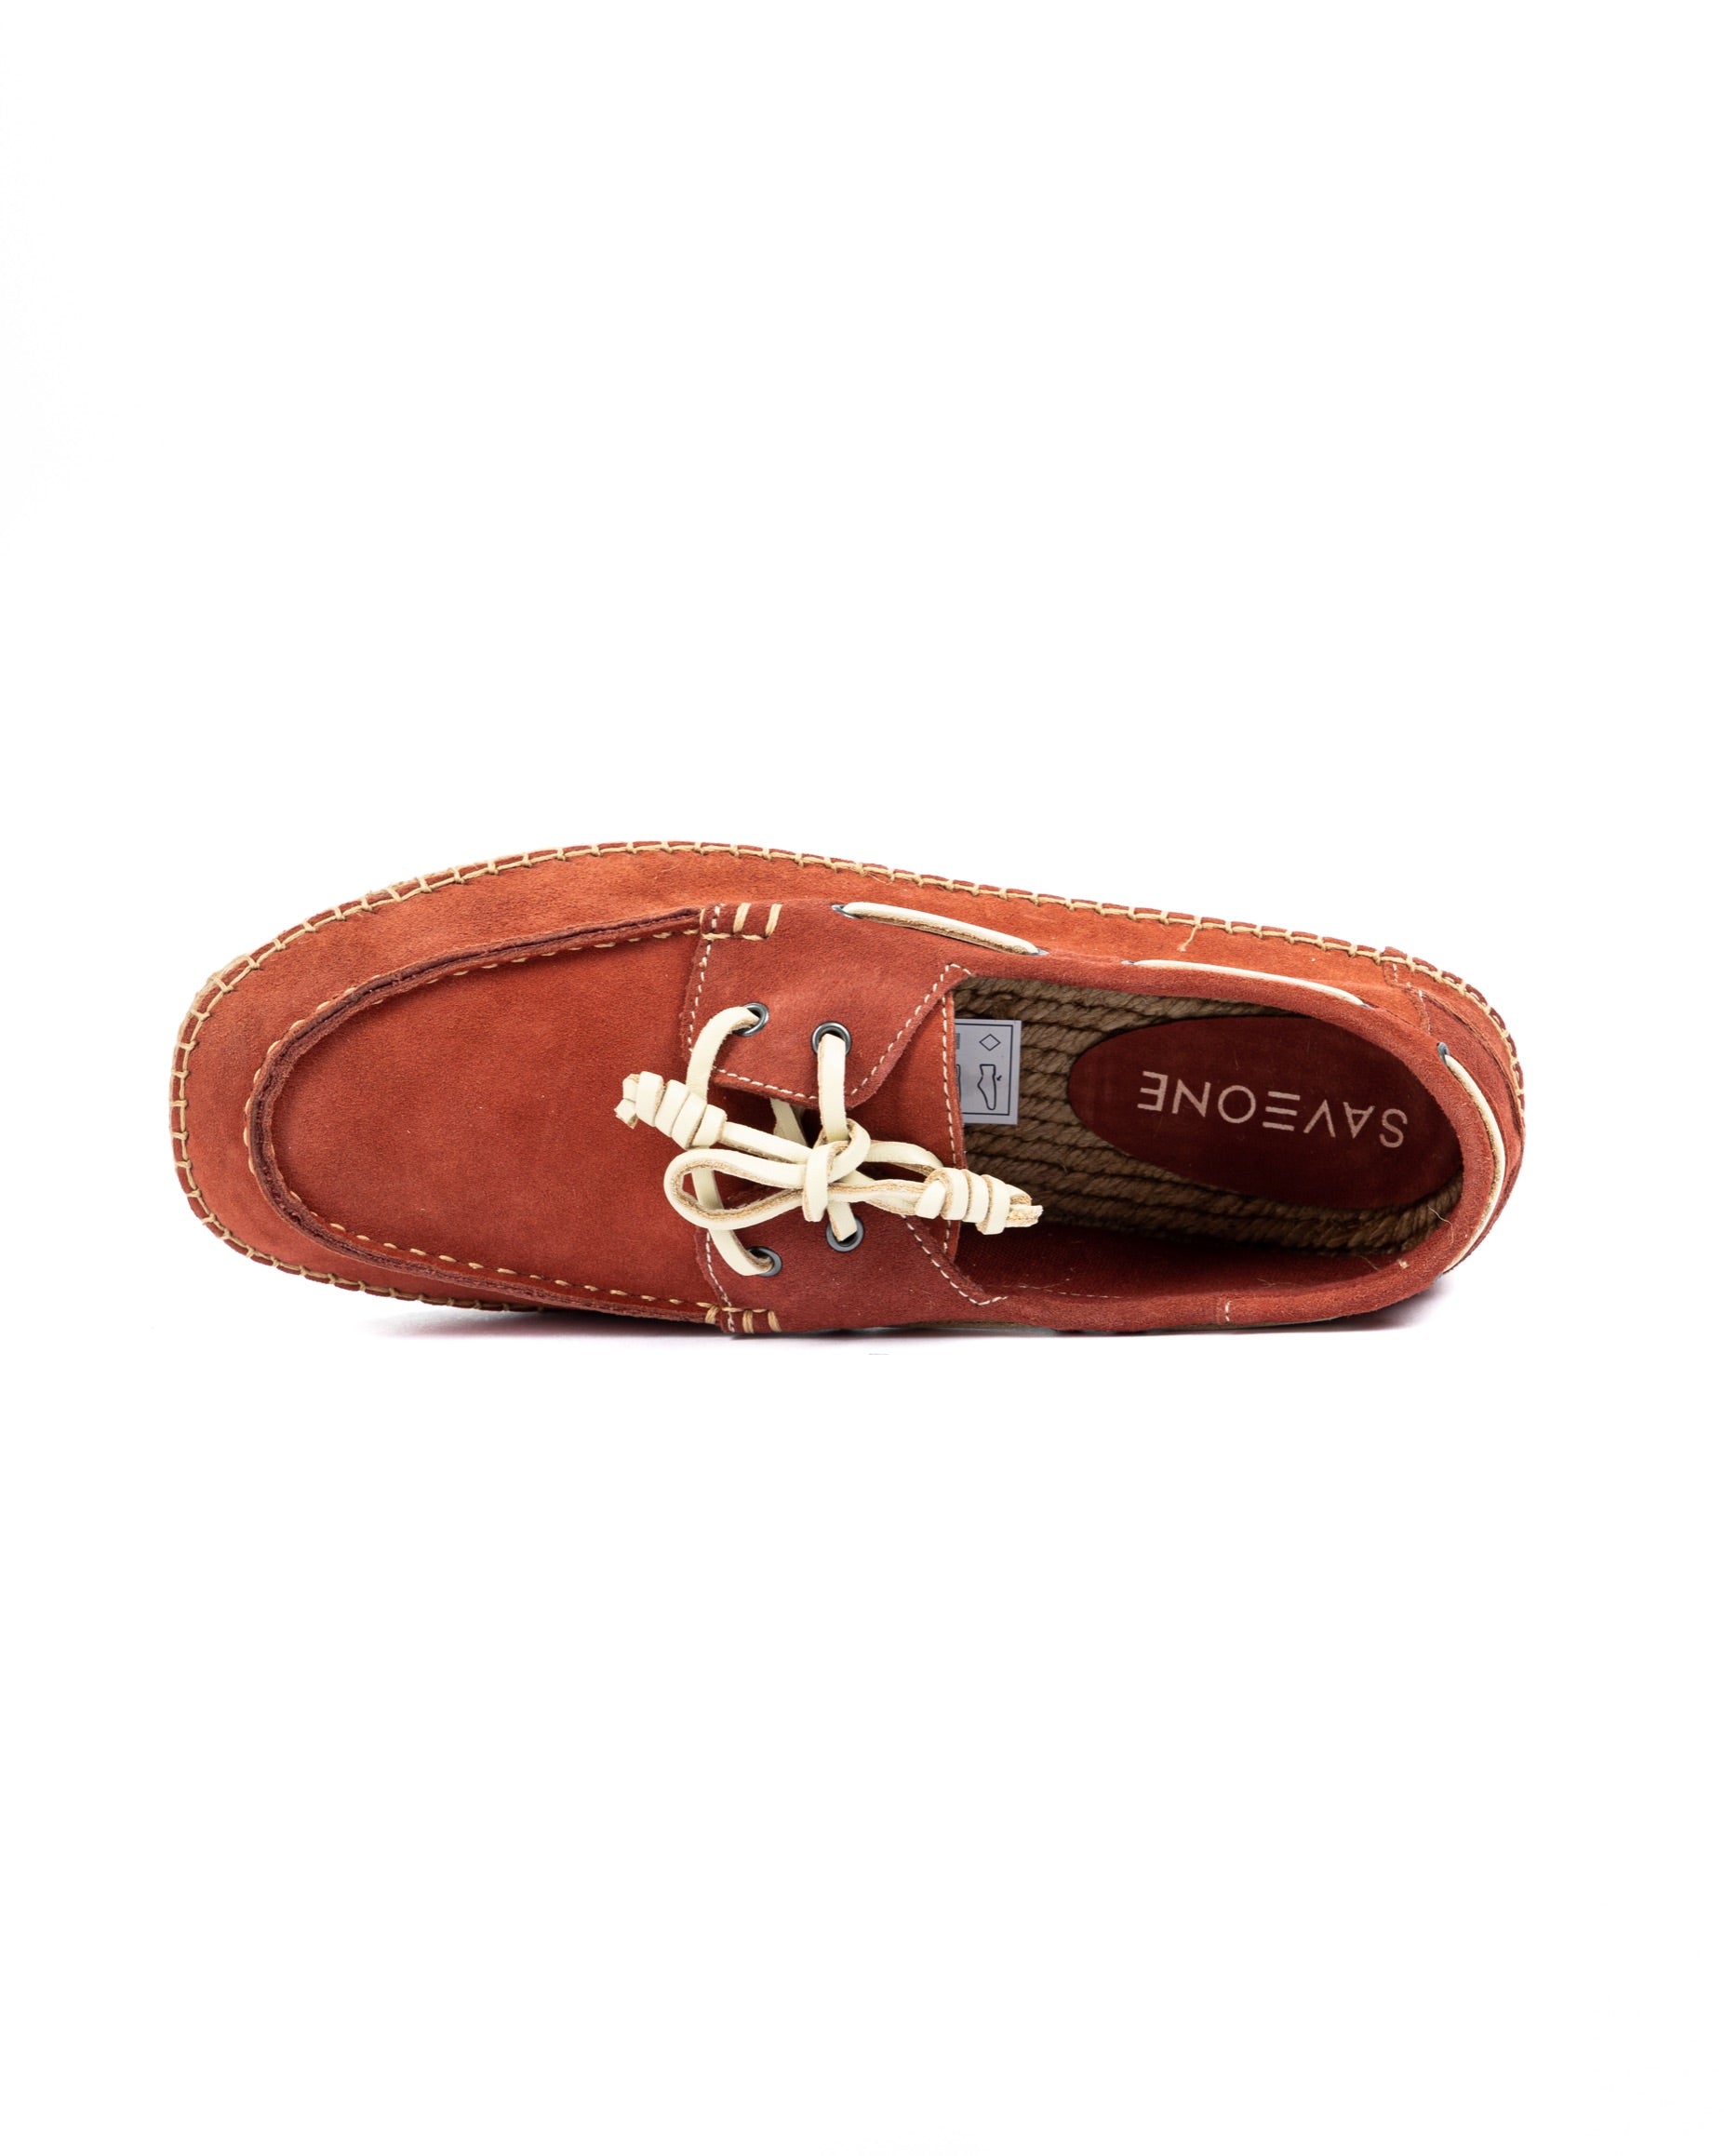 Pompeii - burgundy suede boat with rope bottom